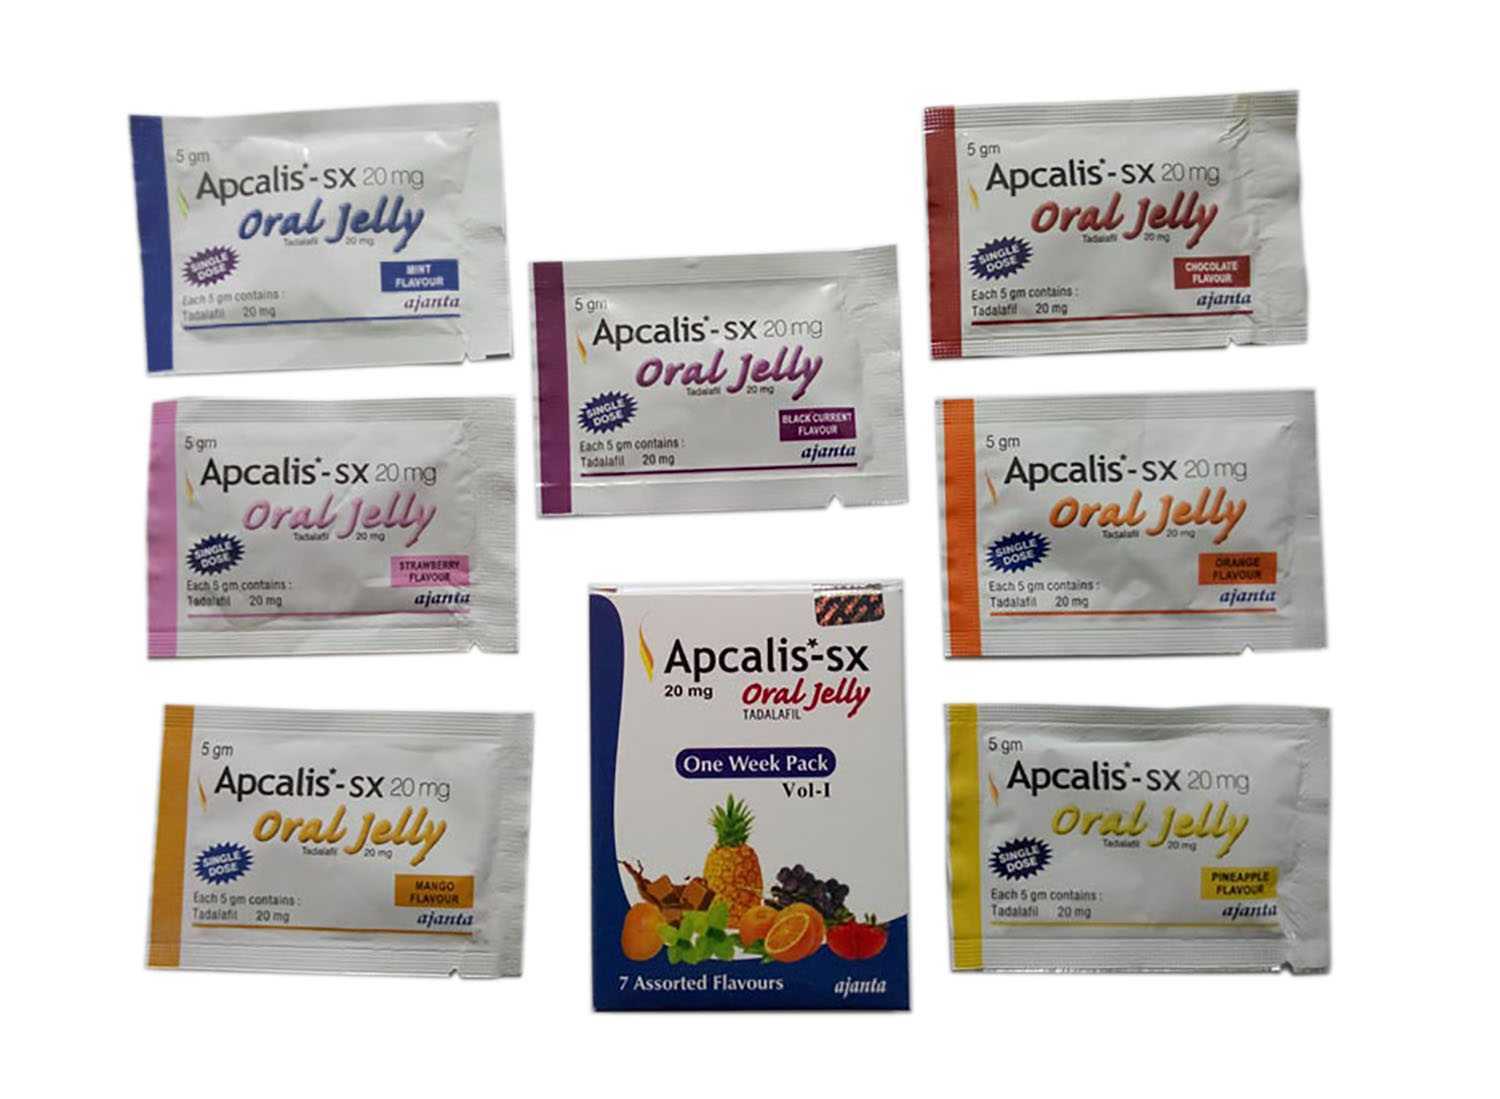 Generic Apcalis Oral Jelly for ED treatment